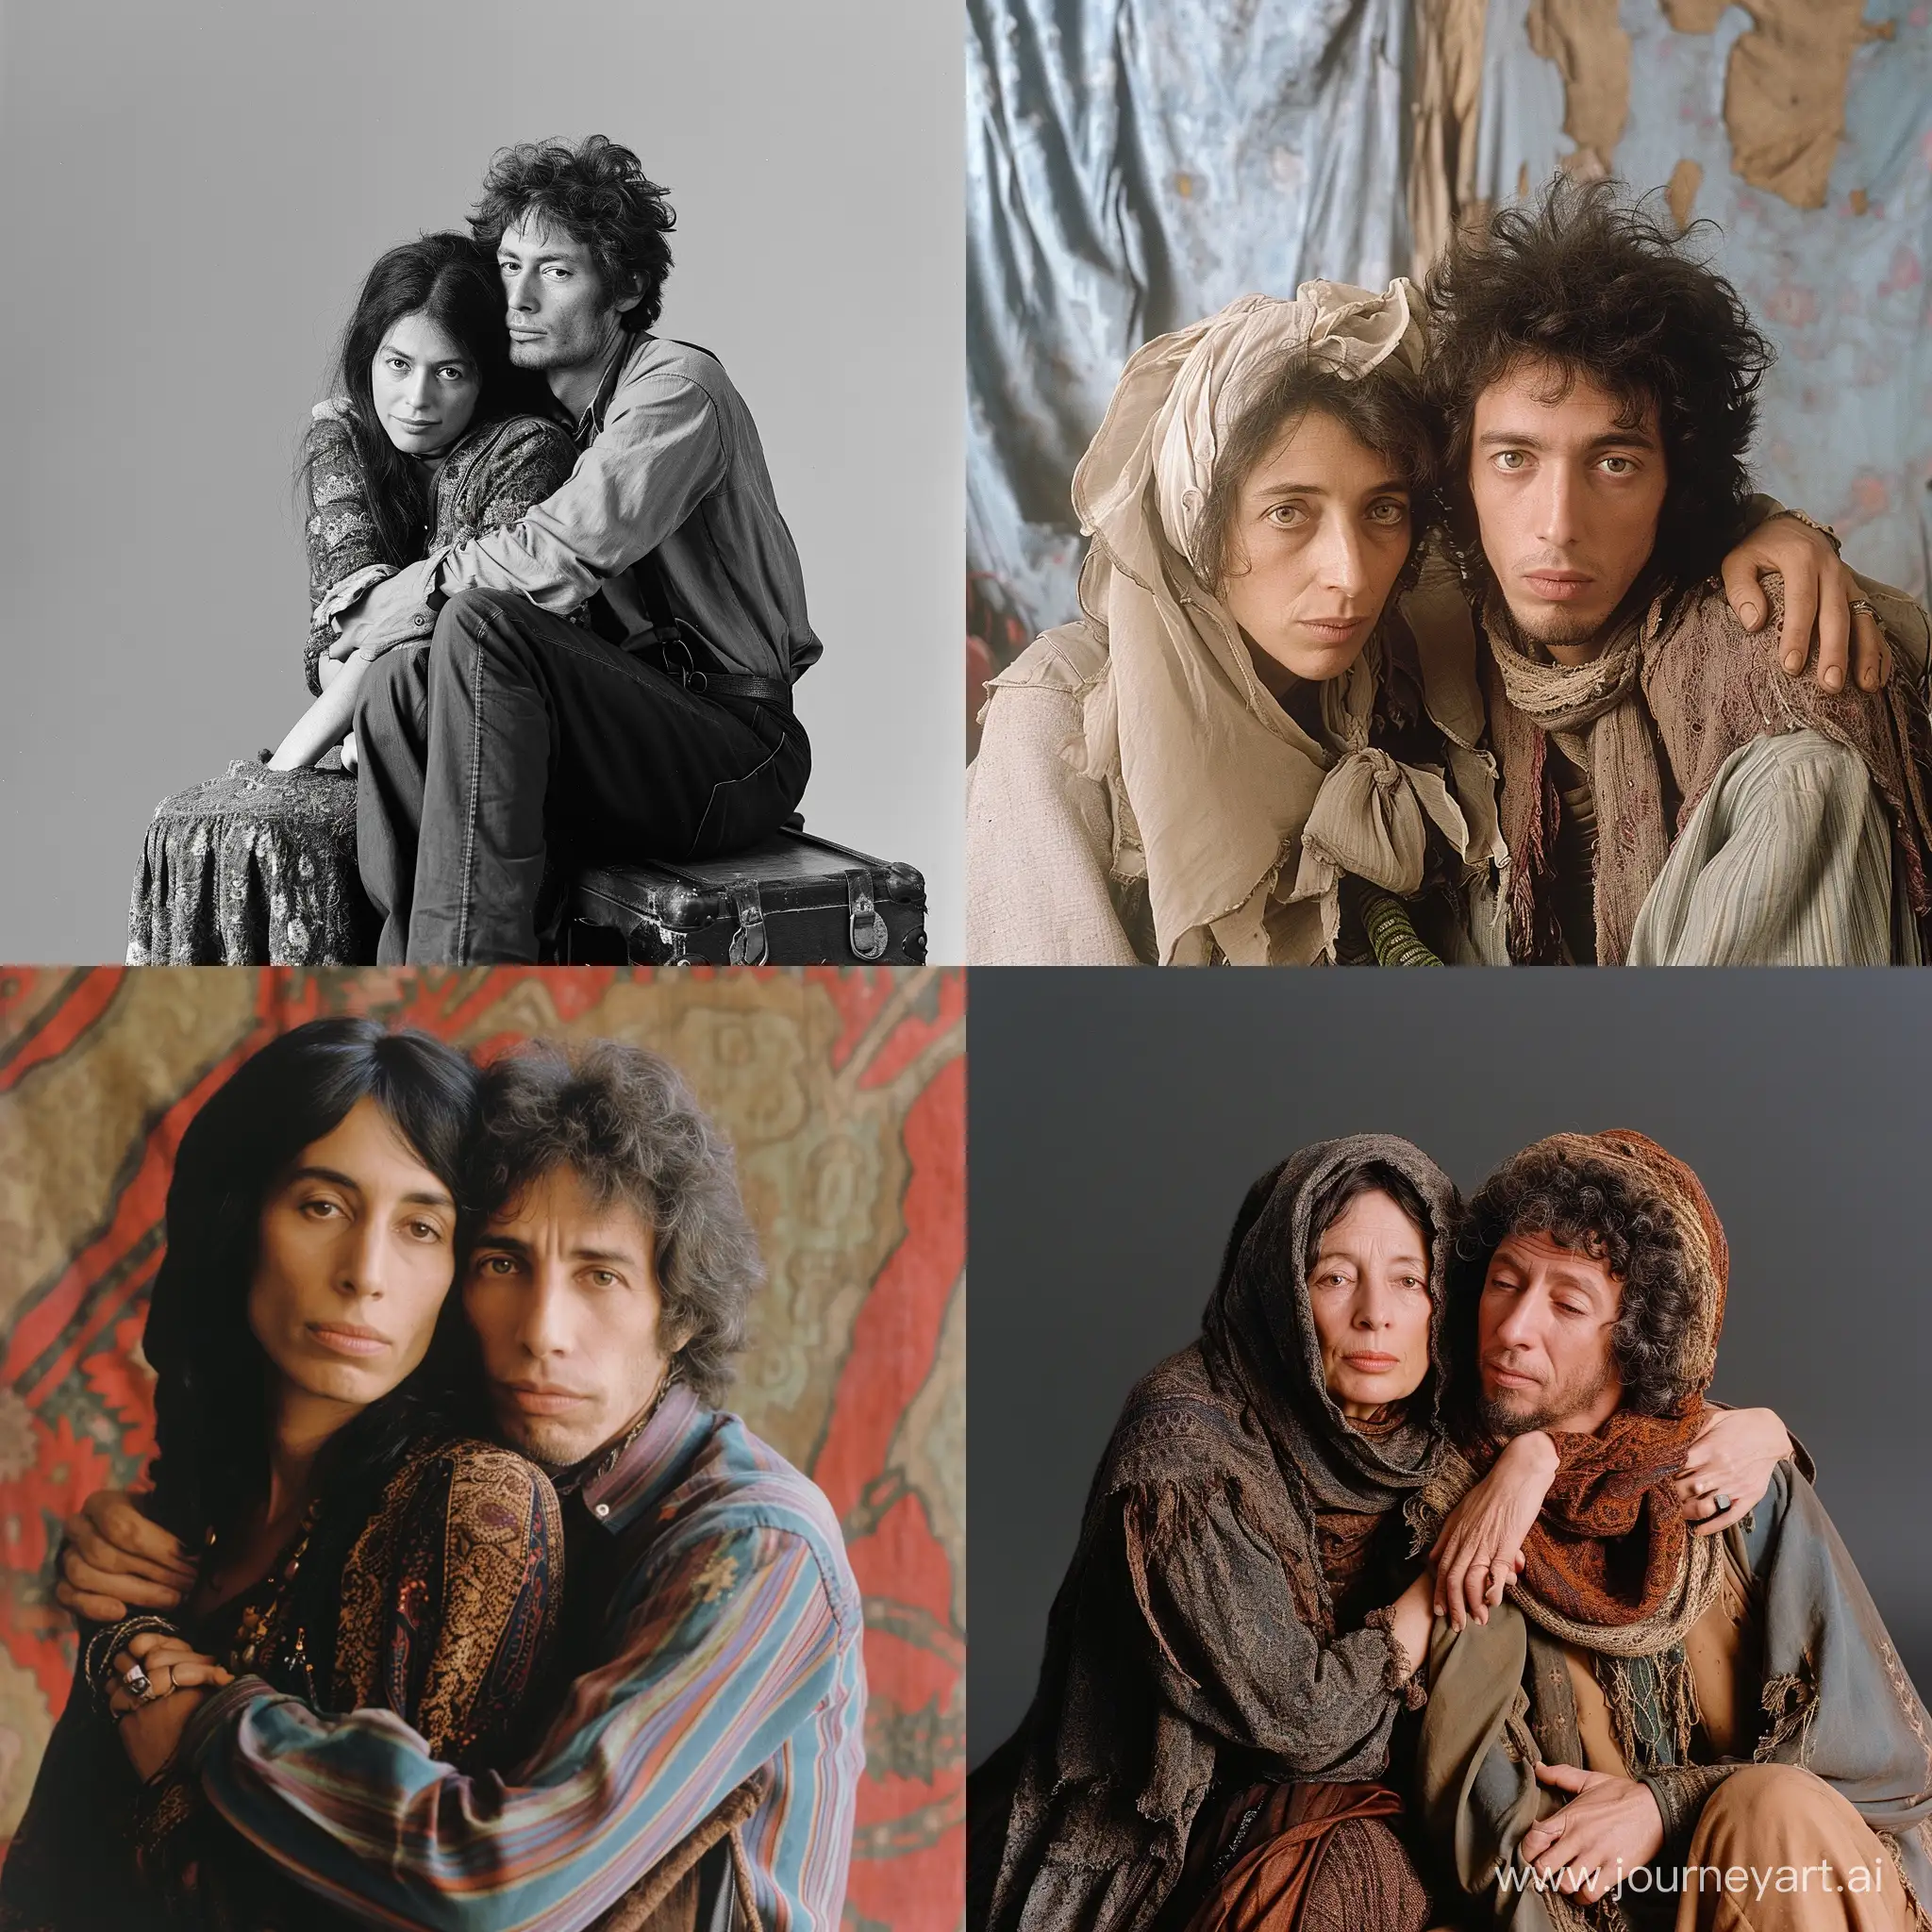 Joan-Baez-and-Bob-Dylan-Recreating-Iconic-Album-Cover-Unfinished-Music-No1-Tribute